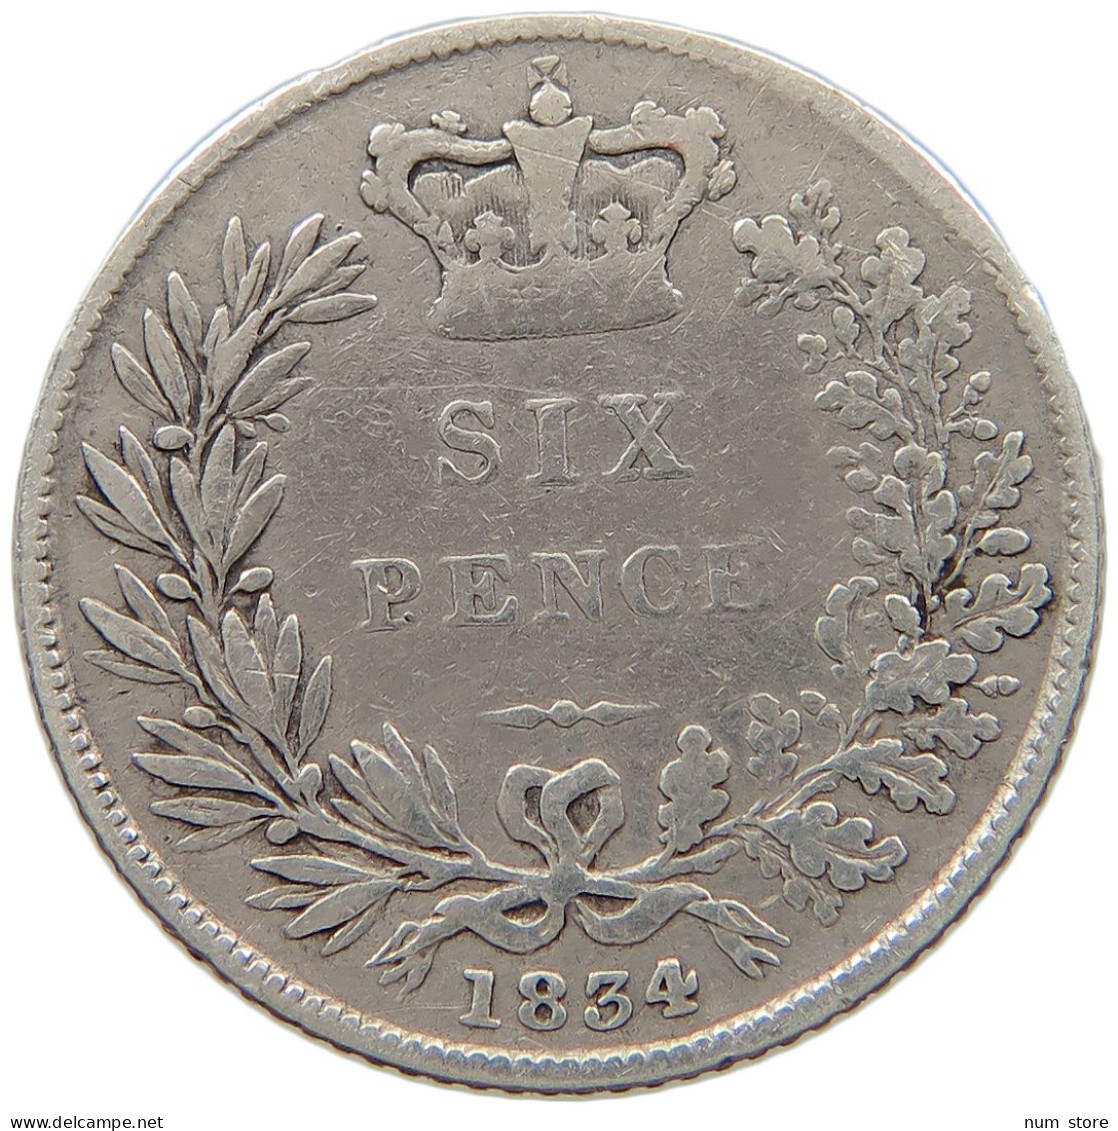 GREAT BRITAIN SIXPENCE 1834 WILLIAM IV. (1830-1837) #t158 0397 - H. 6 Pence